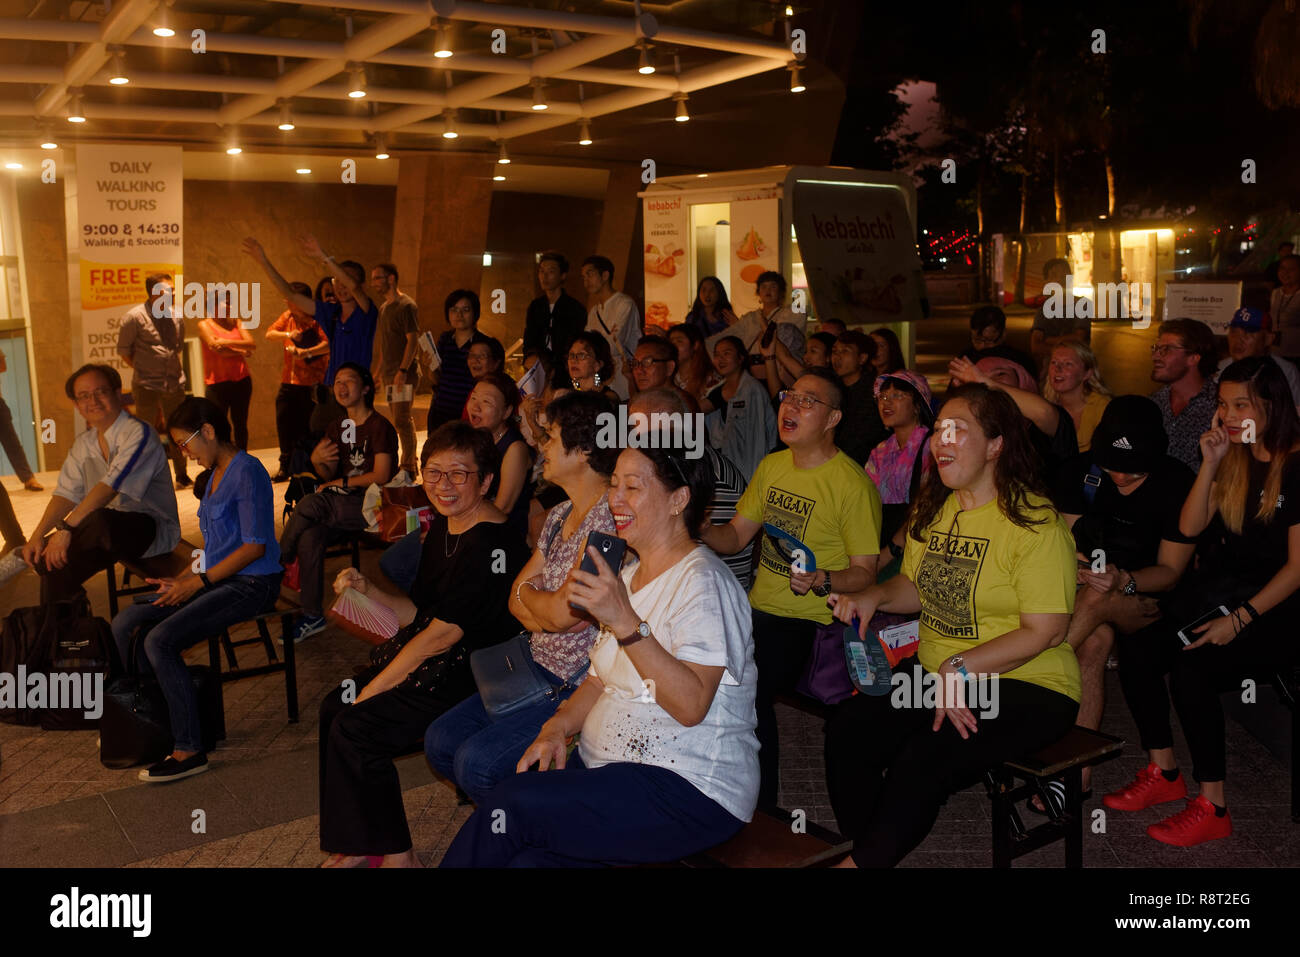 Enthusiastic audience clapping and cheering karaoke singer along the Esplanade walk in Singapore Stock Photo